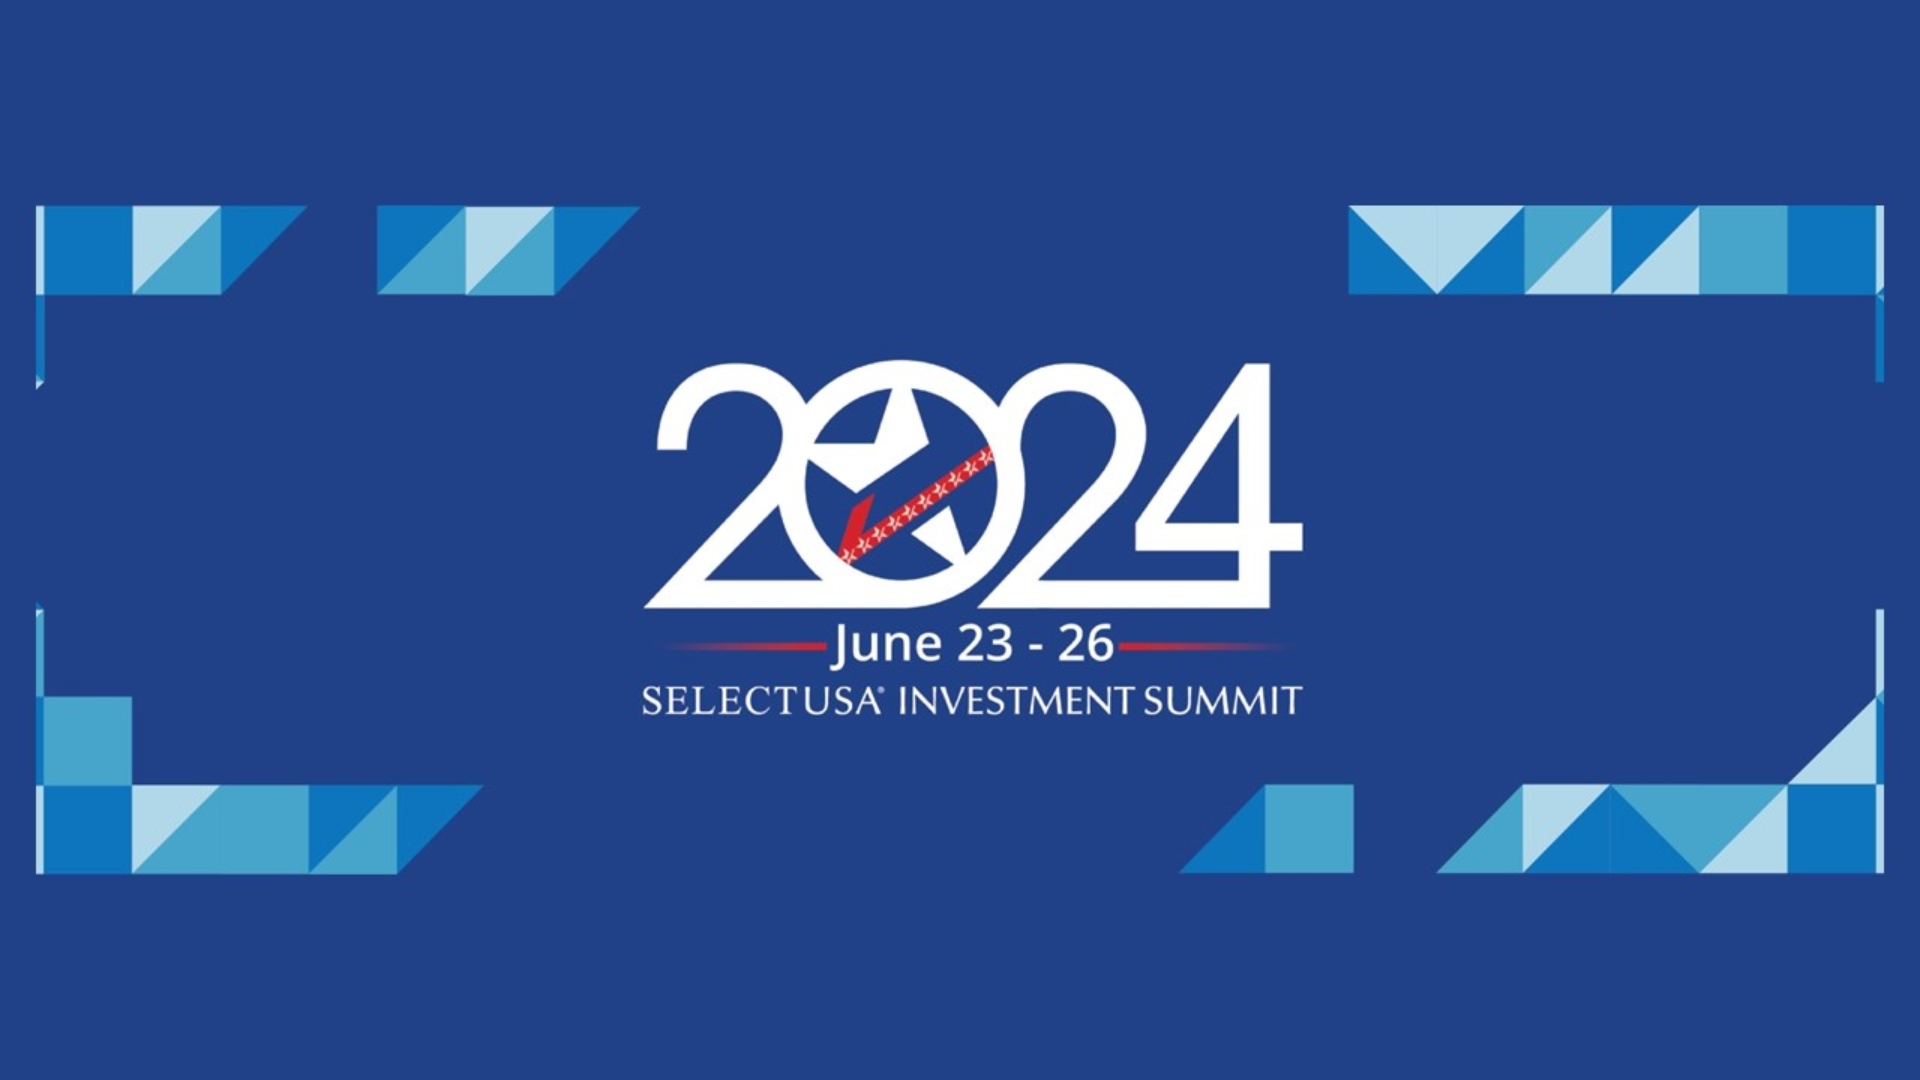 SelectUSA Investment Summit logo on a blue background. 